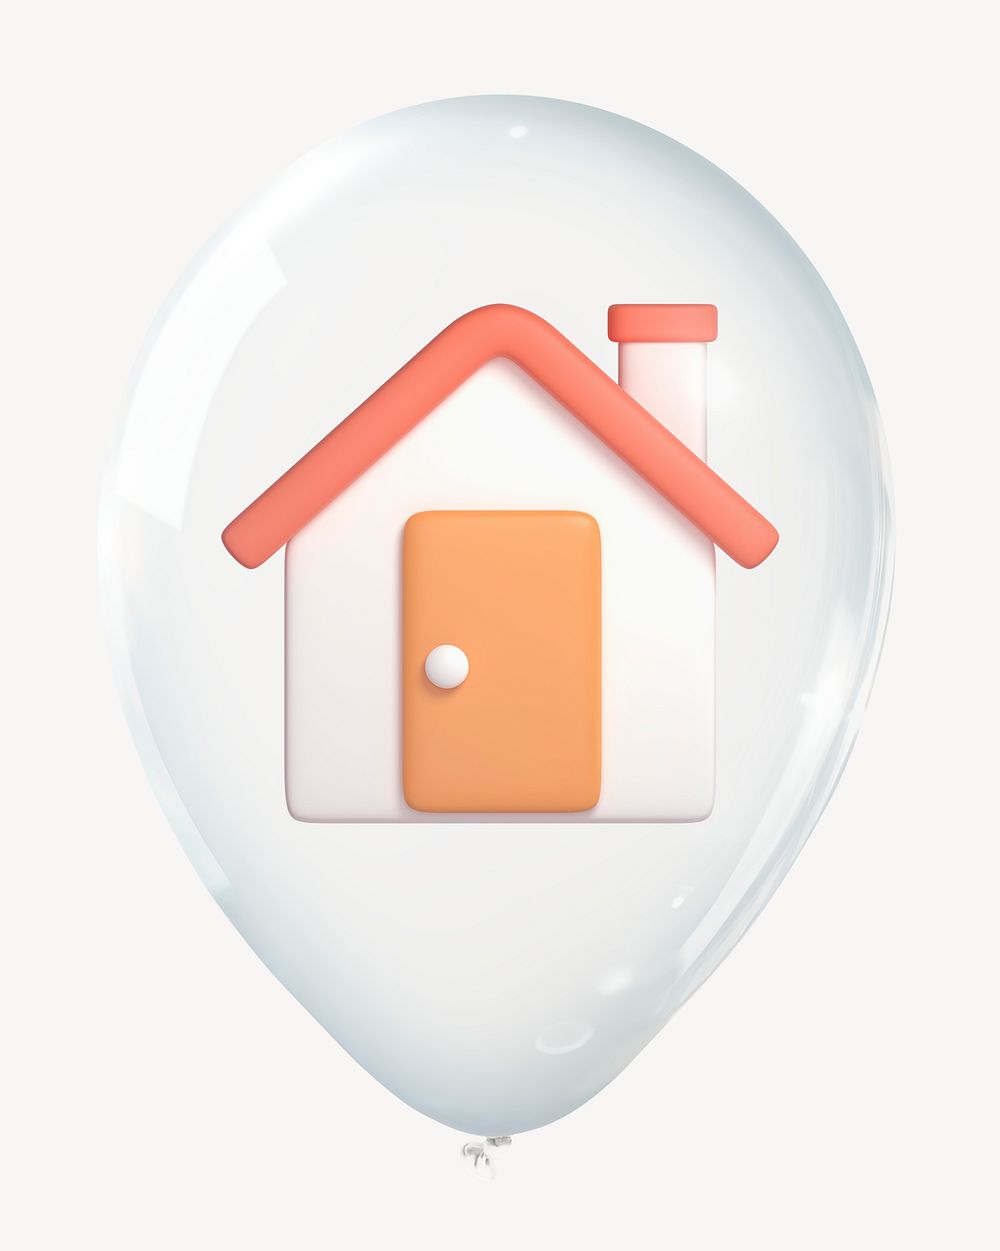 Home, real estate business 3D balloon collage element psd